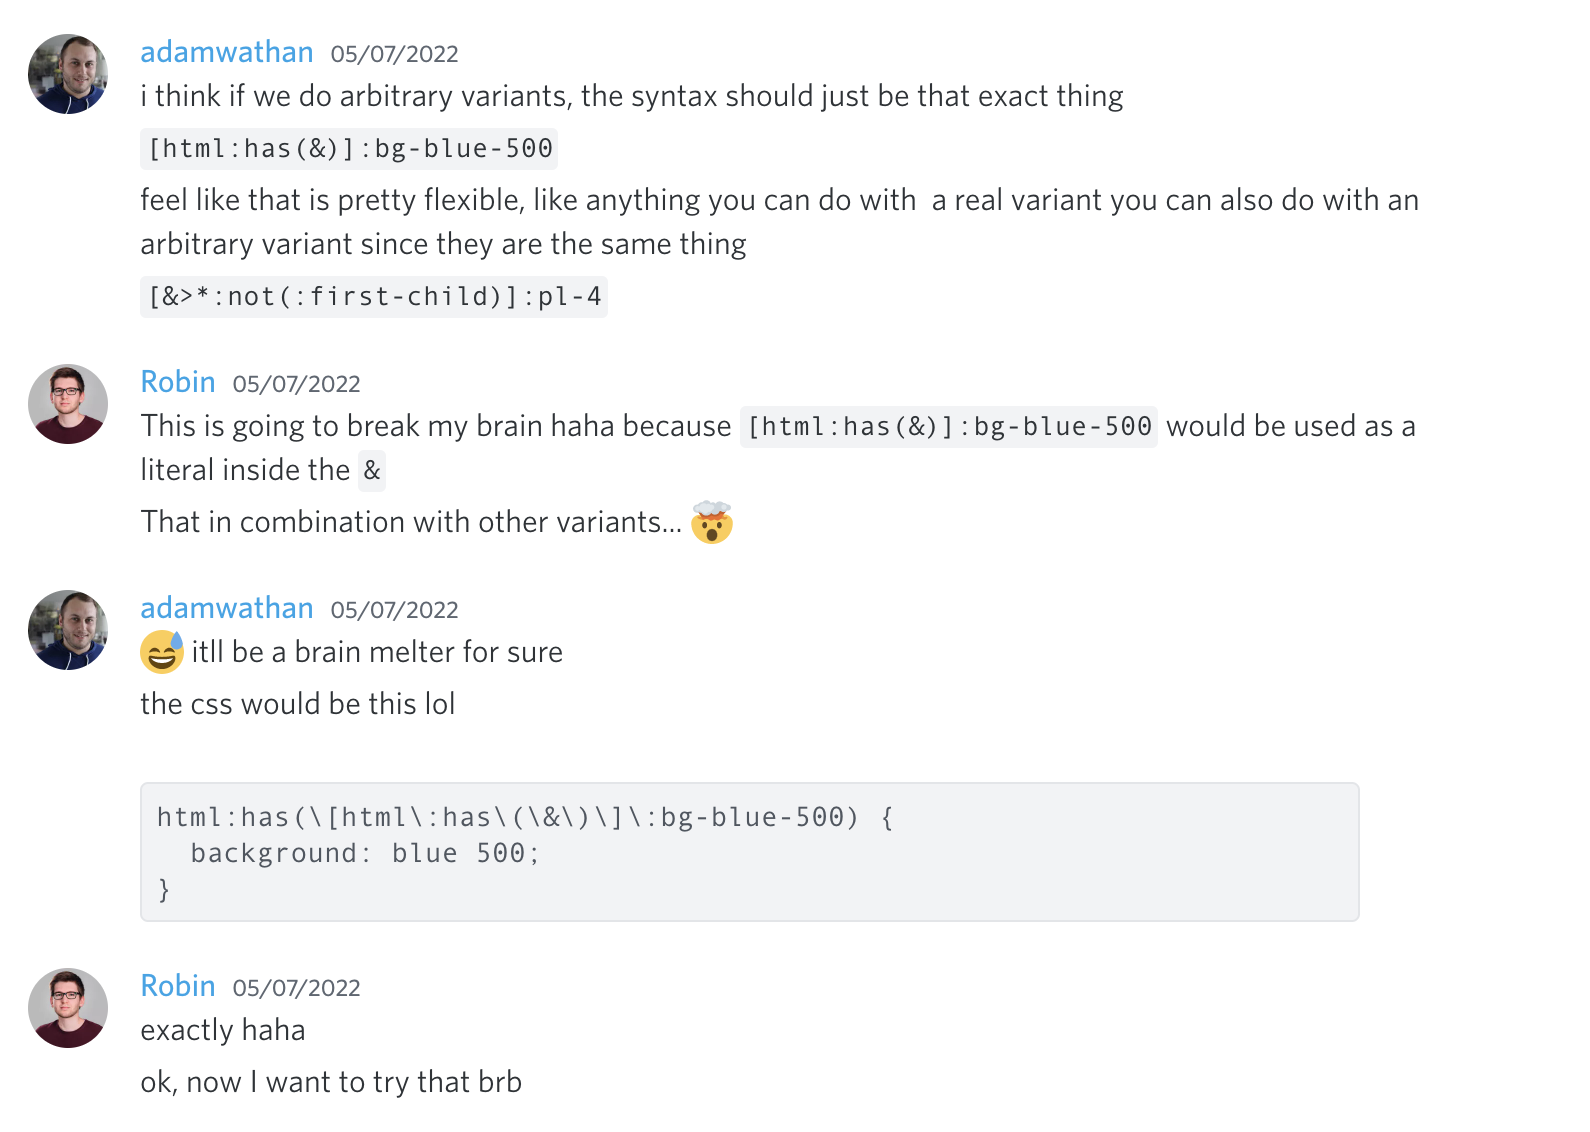 Adam Wathan: I think if we do arbitrary variants, the syntax should just be that exact thing, '[html:has(&)]:bg-blue-500'. Feel like that is pretty flexible, like anything you can do with a real variant you can also do with an arbitrary variant since they are the same thing. '[&>*:not(:first-child)]:pl-4'. Robin: This is going to break my brain haha because '[html:has(&)]:bg-blue-500' would be used as a literal inside the '&'. That in combination with other variants... 🤯. Adam Wathan: 😅 it'll be a brain melter for sure. The CSS would be this lol 'html:has(\[html\:has\(\&\)\]\:bg-blue-500 { background: blue 500 }'. Robin: exactly haha. ok, now I want to try that brb.